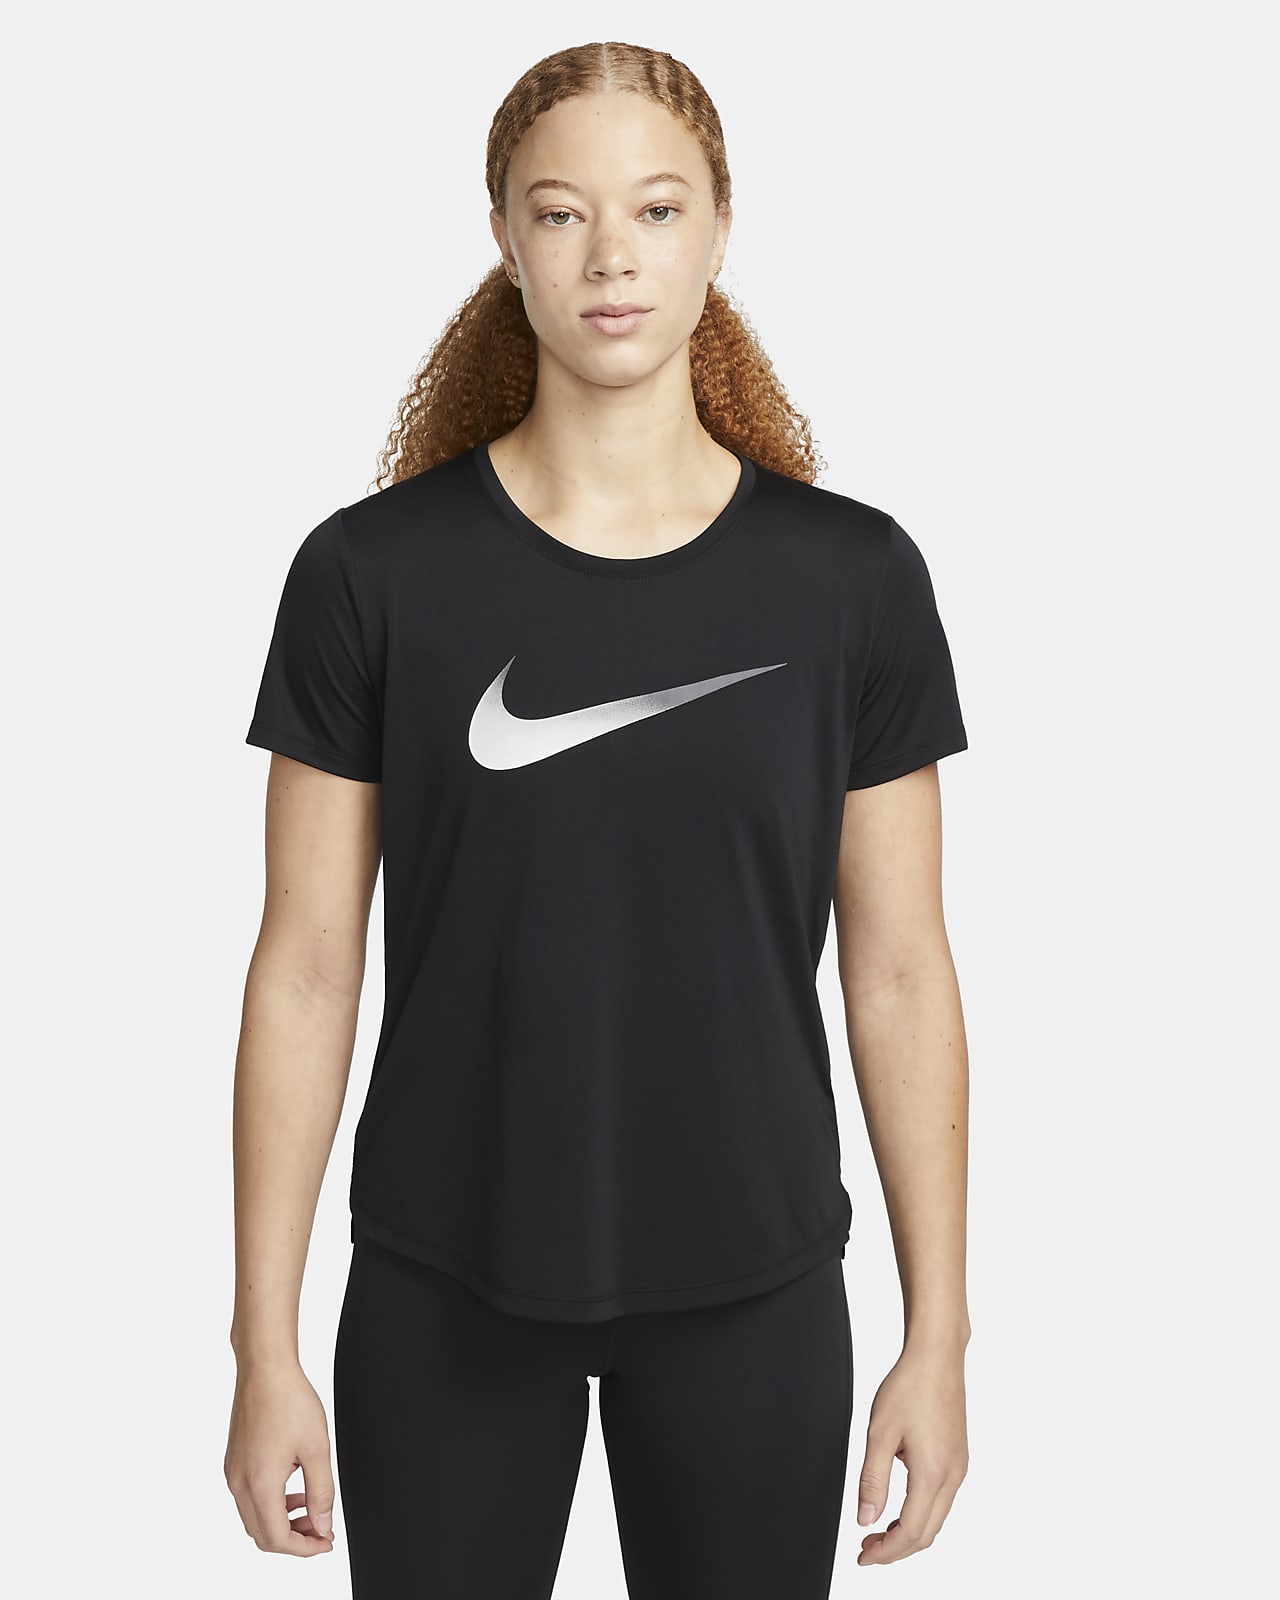 https://static.nike.com/a/images/t_PDP_1280_v1/f_auto,q_auto:eco/75adaa31-b10f-4a31-be3c-c82f7e0b1ddf/dri-fit-one-short-sleeve-running-top-JGn551.png